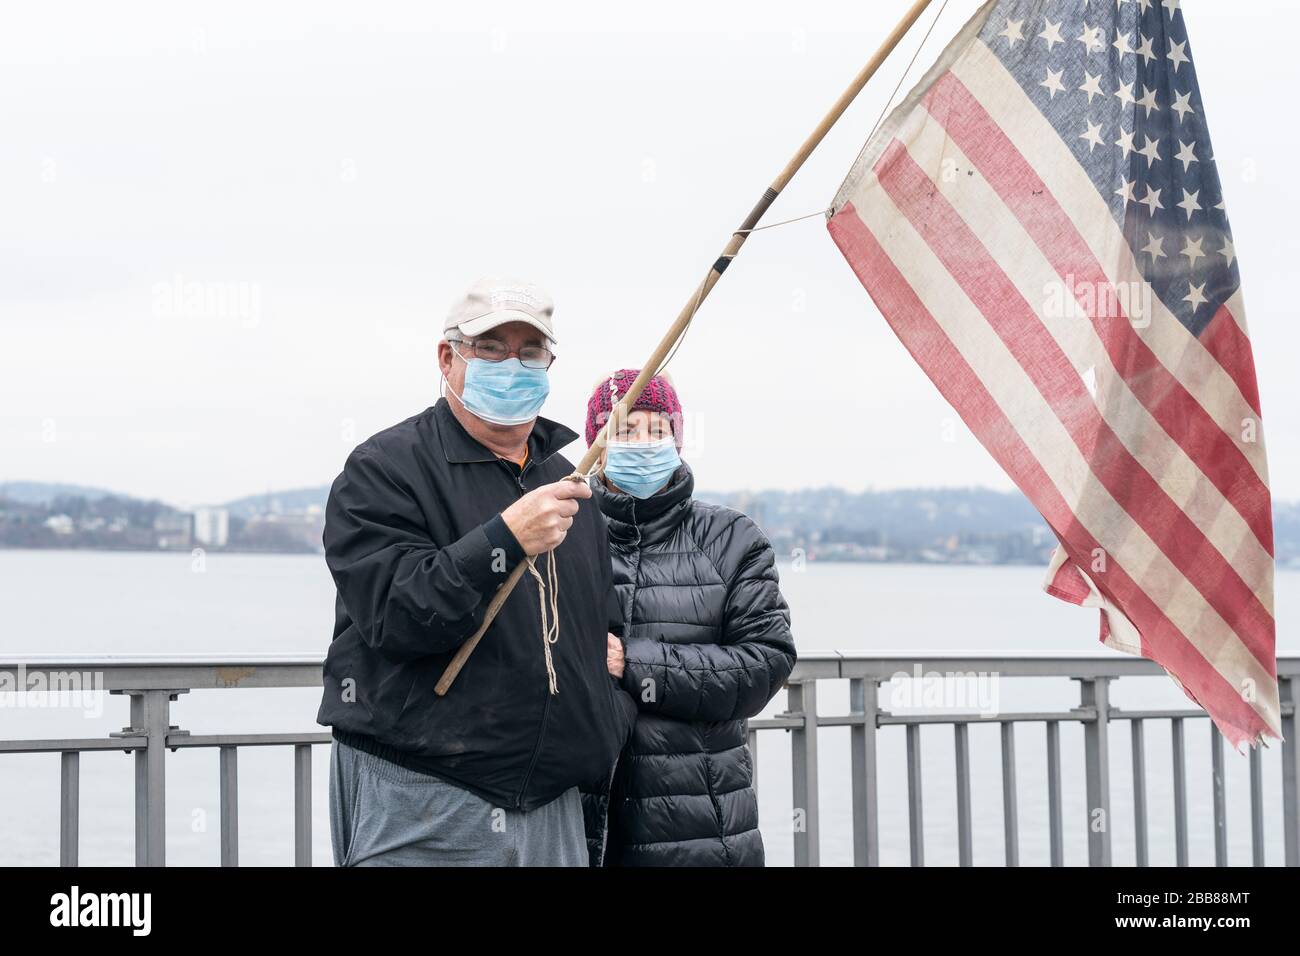 New York, NY - March 30, 2020: Residents of Brooklyn Roy and Lois Schneit greet USNS Comfort Navy ship with 1000 beds to relief NYC hospitals on COVID-19 pandemic passes under Verrazzano-Narrows bridge on its way in New York harbor Stock Photo